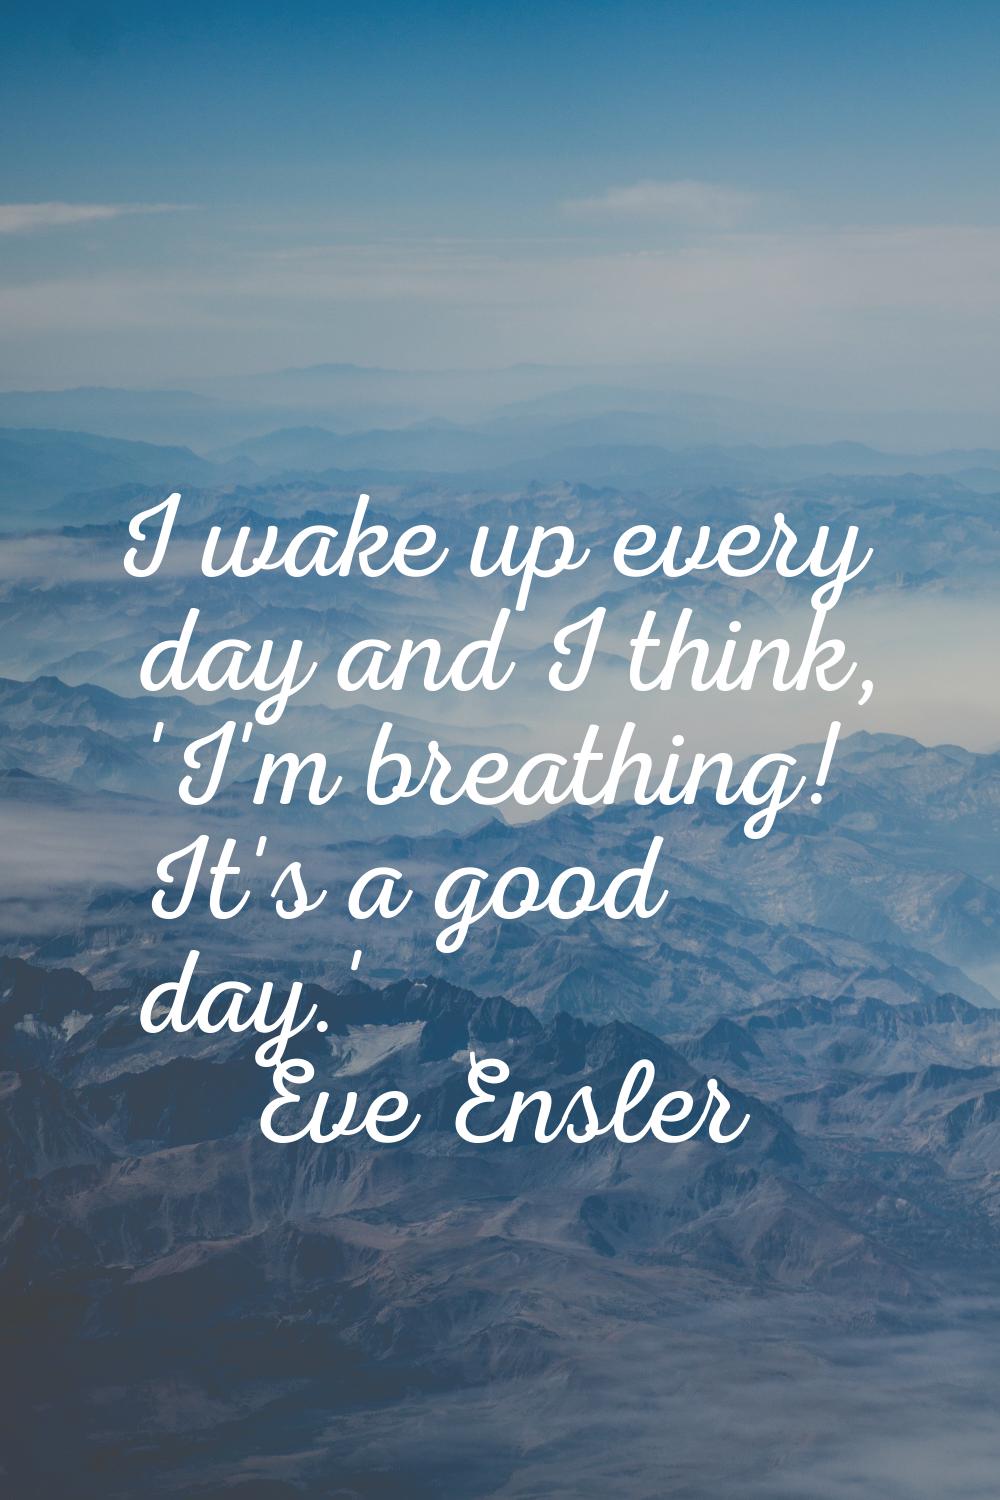 I wake up every day and I think, 'I'm breathing! It's a good day.'